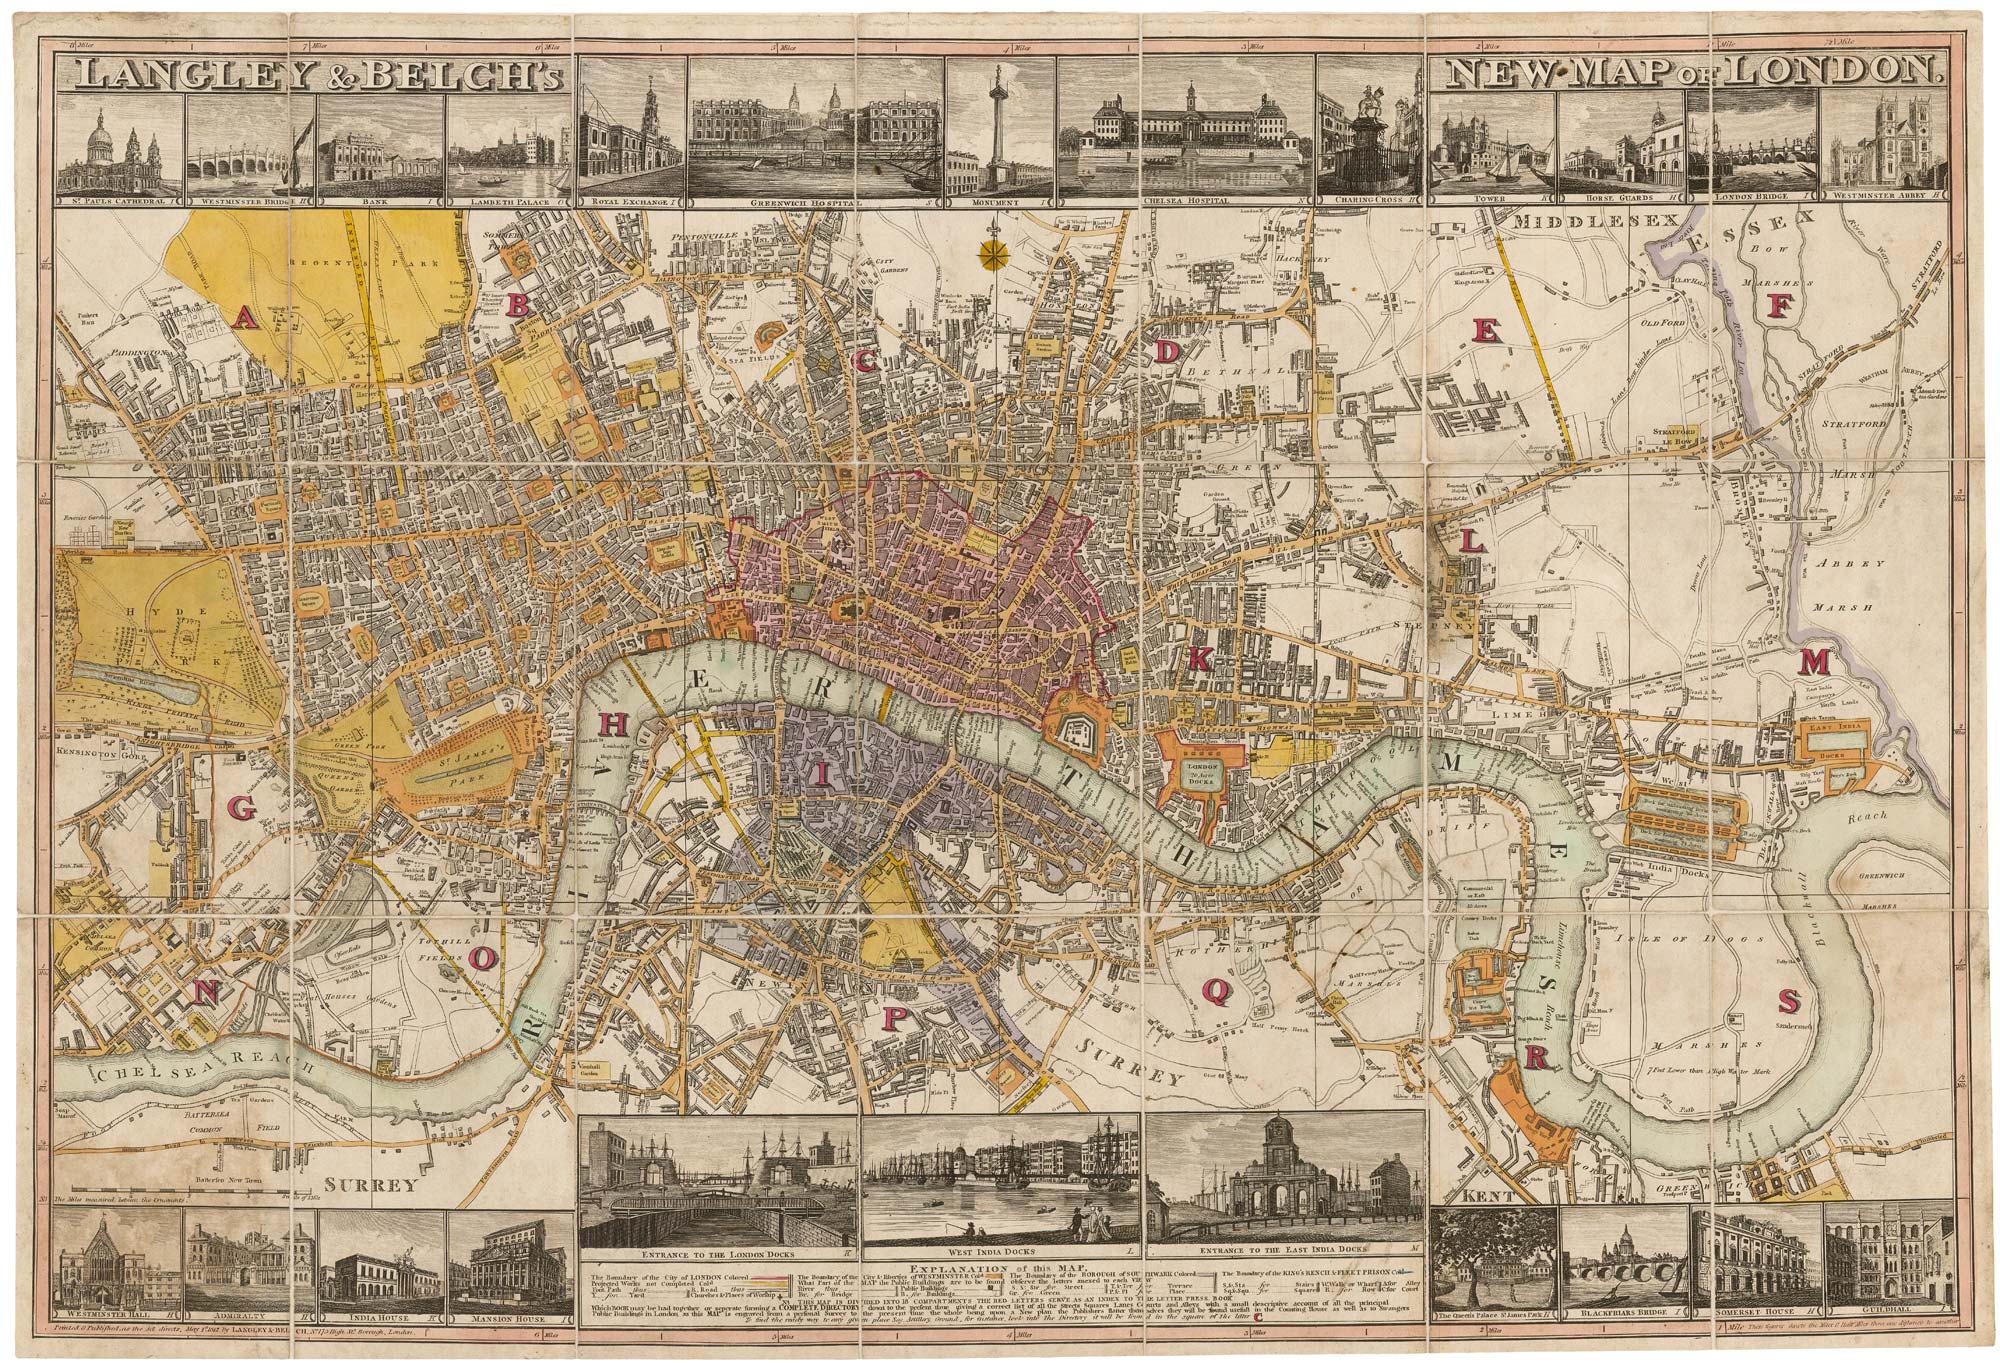 Langley & Belch's New Map of London